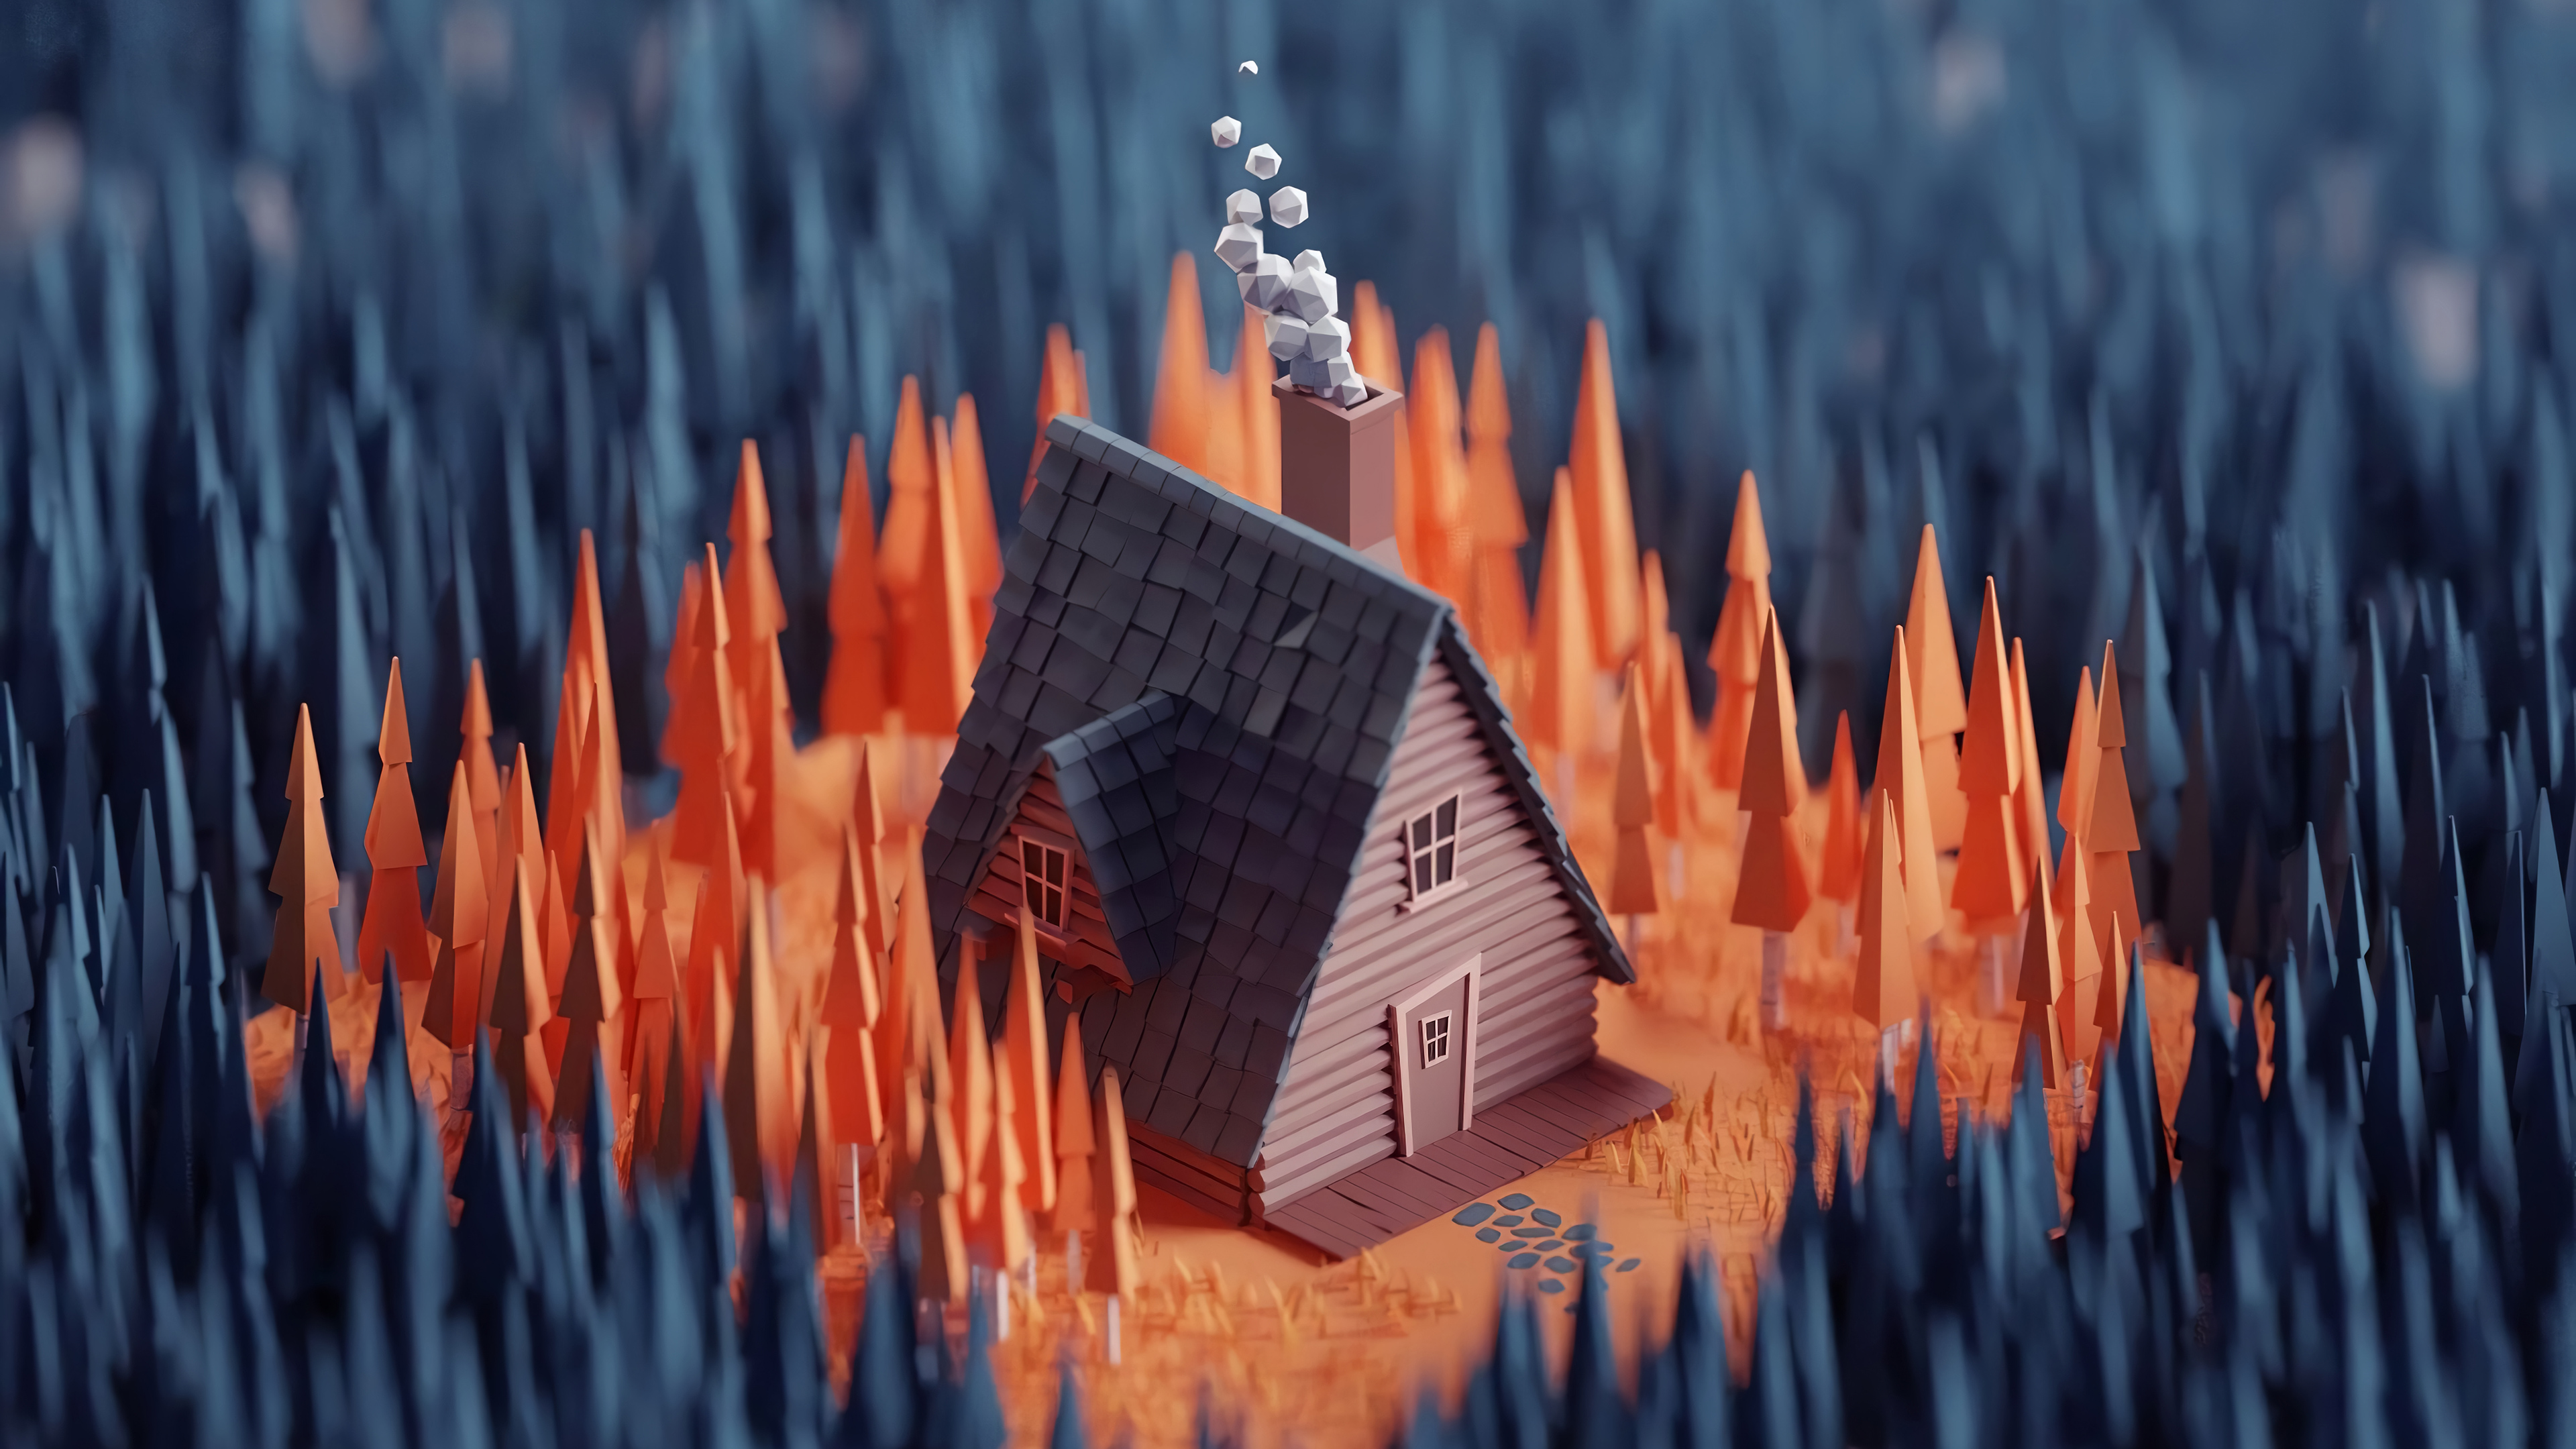 General 3840x2160 digital art artwork low poly nature house hut forest trees pine trees architecture Architecture models cabin isometric CGI chimneys smoke orange